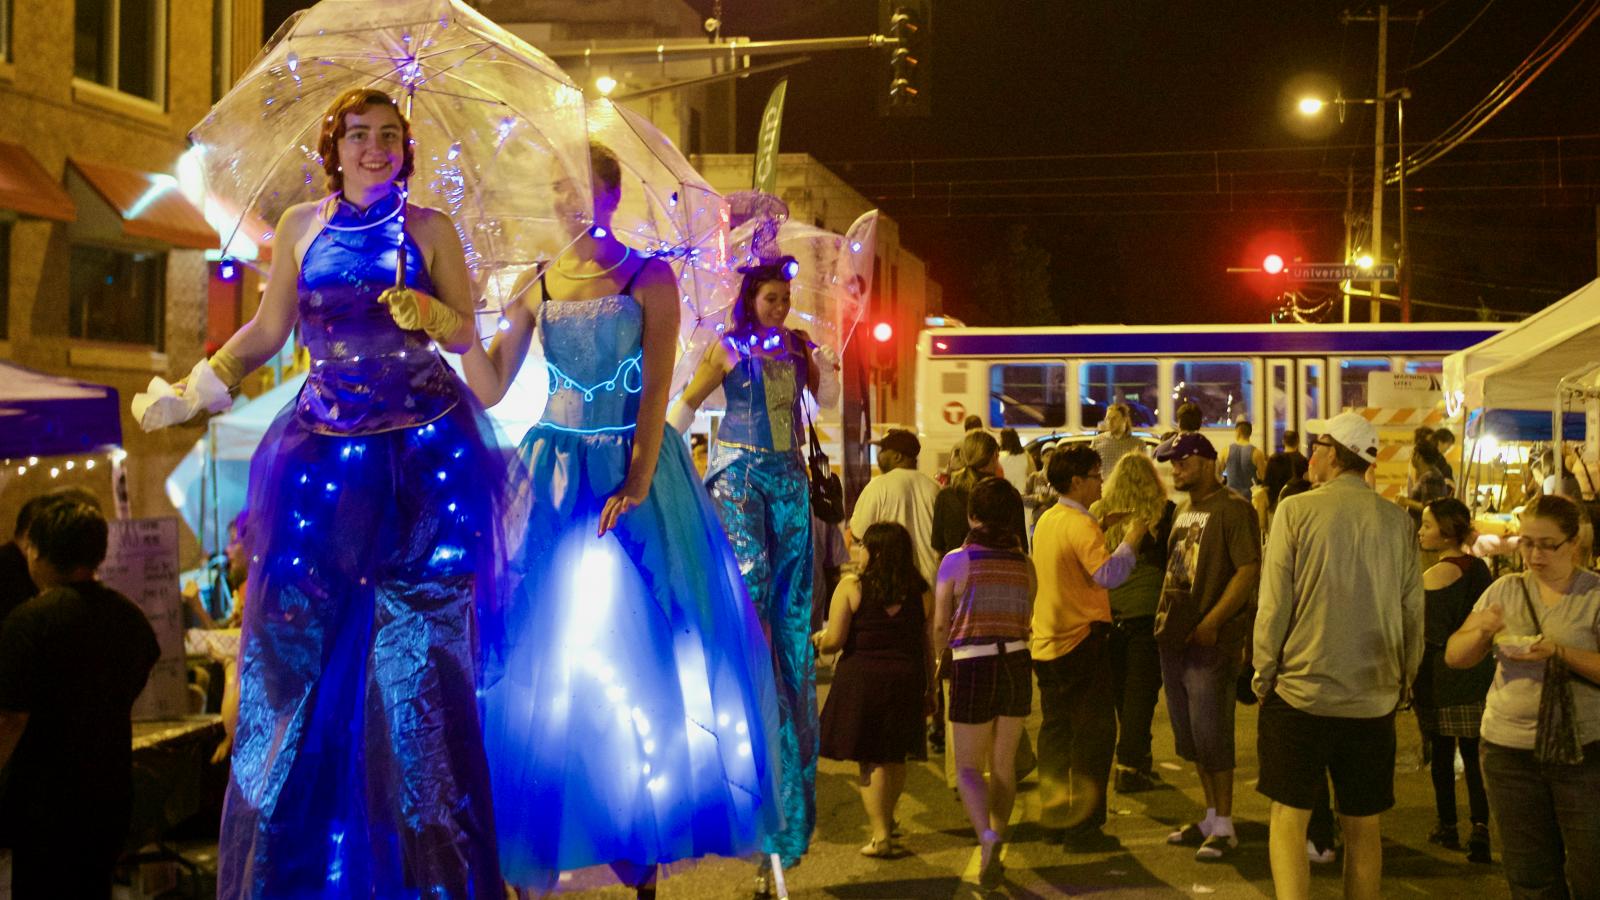 Women in blue costumes with lights, carrying umbrellas, walking on stilts through the night market. 